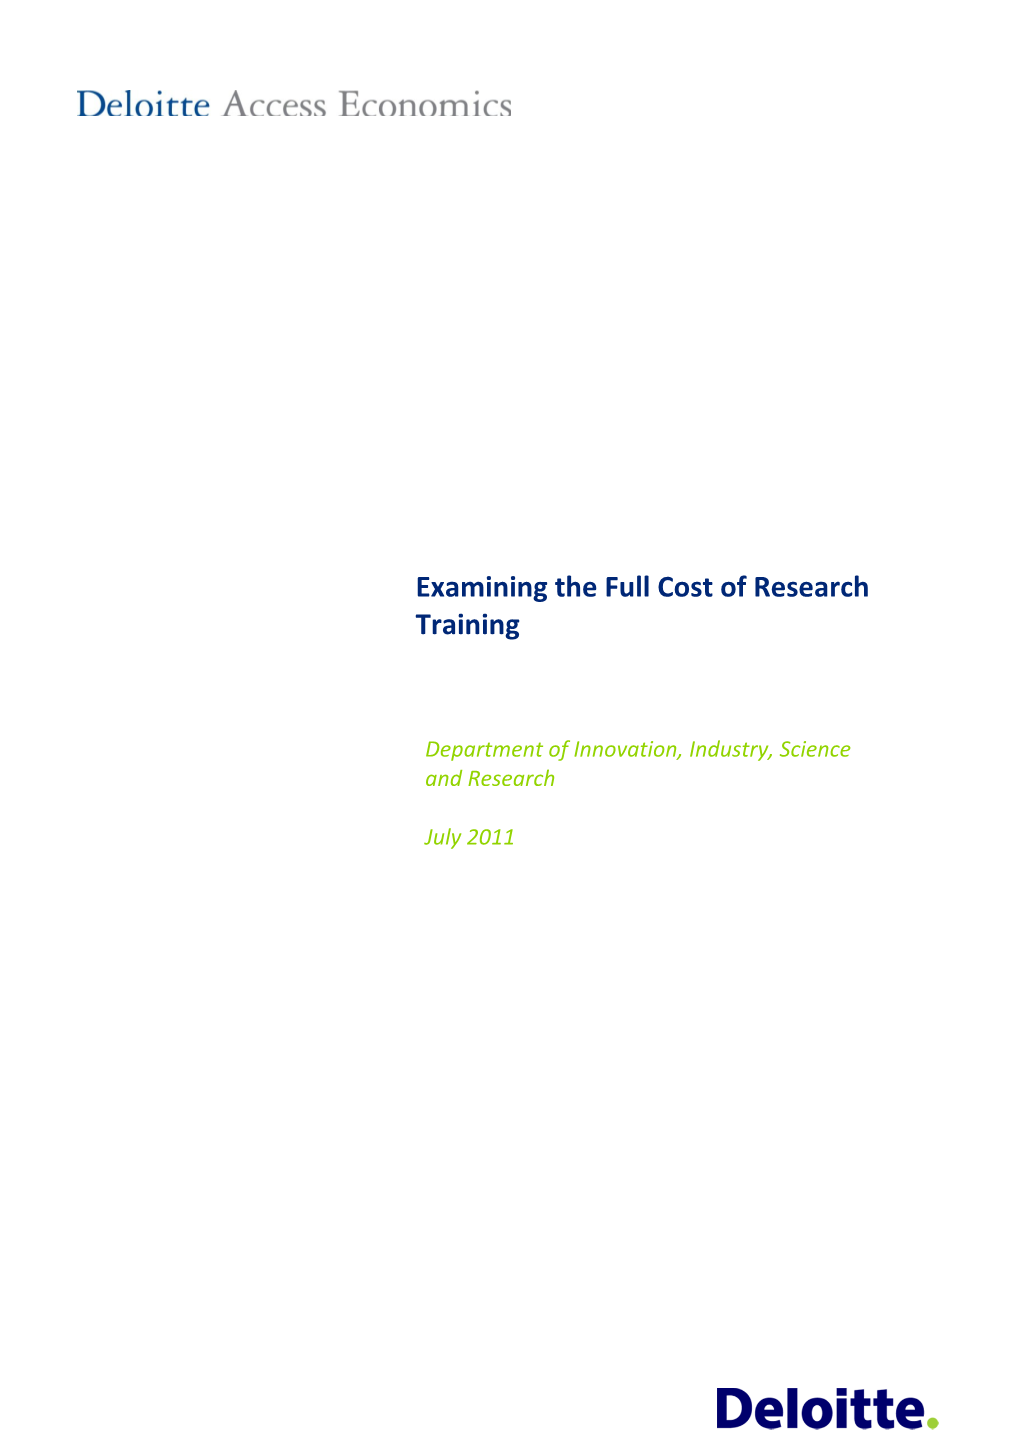 Examining the Full Cost of Research Training